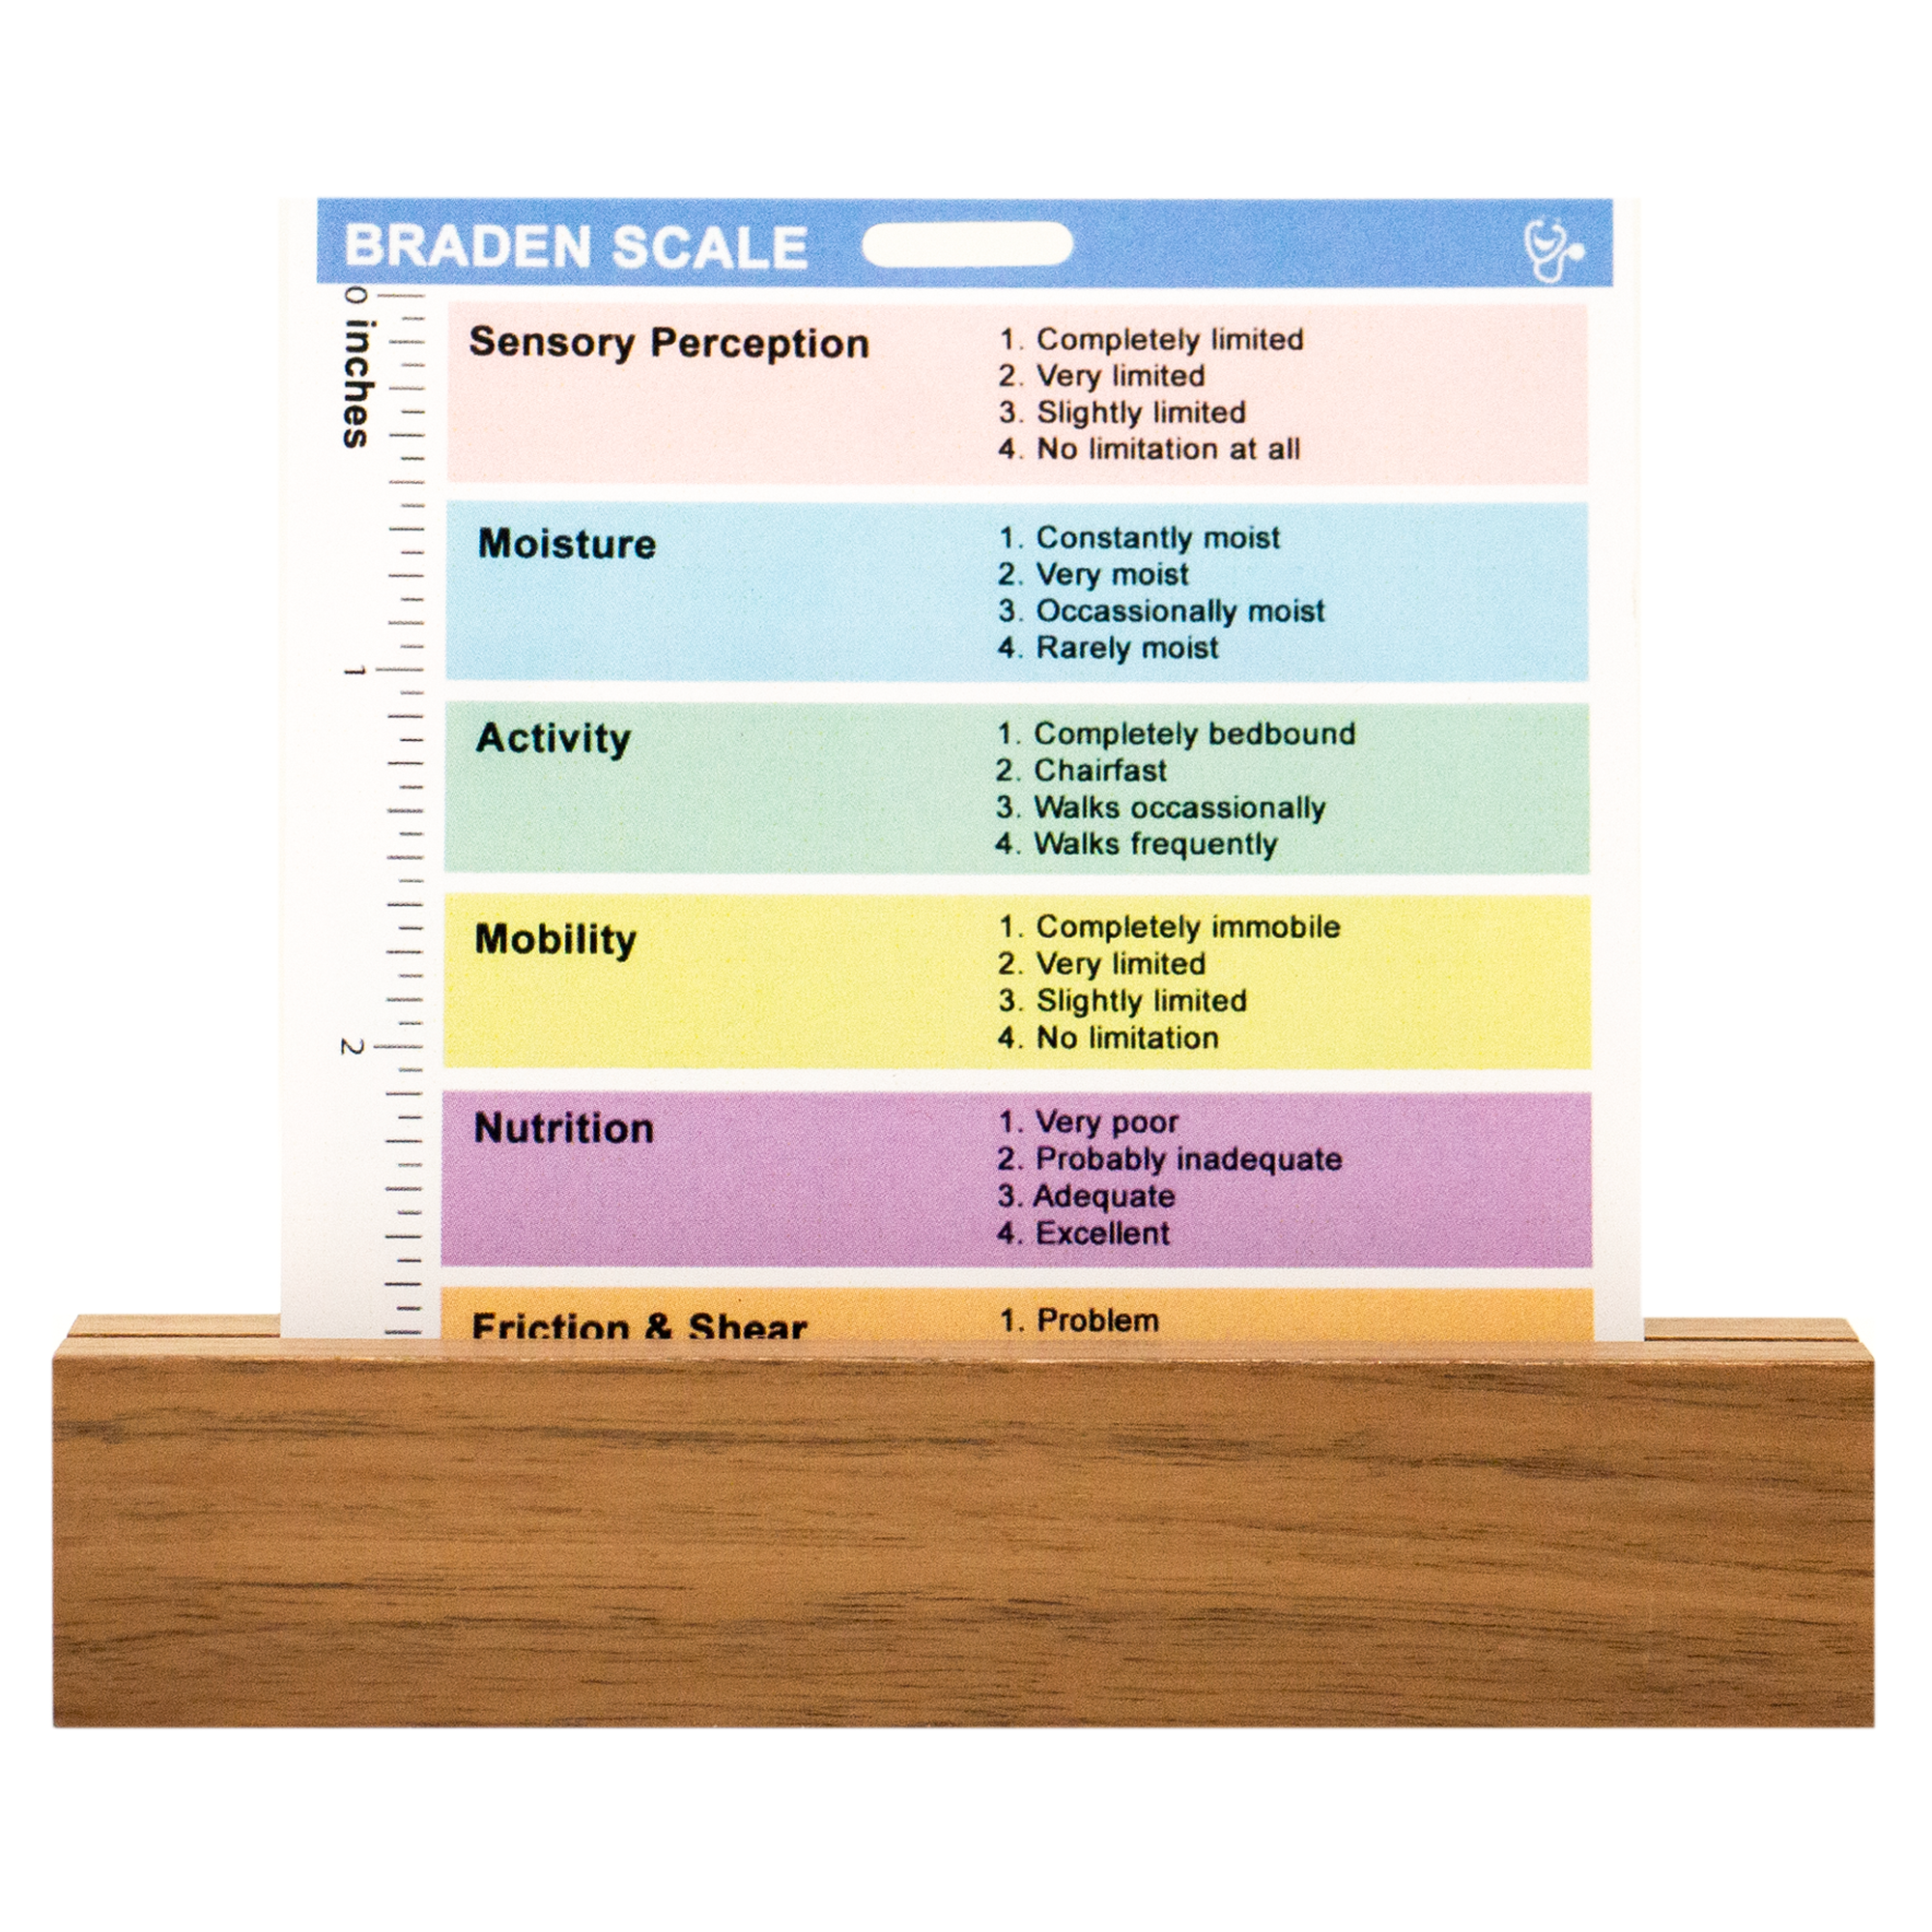 Side one of our Wound Care badge buddy contains the Braden scale which is useful in measuring risk for pressure wounds.